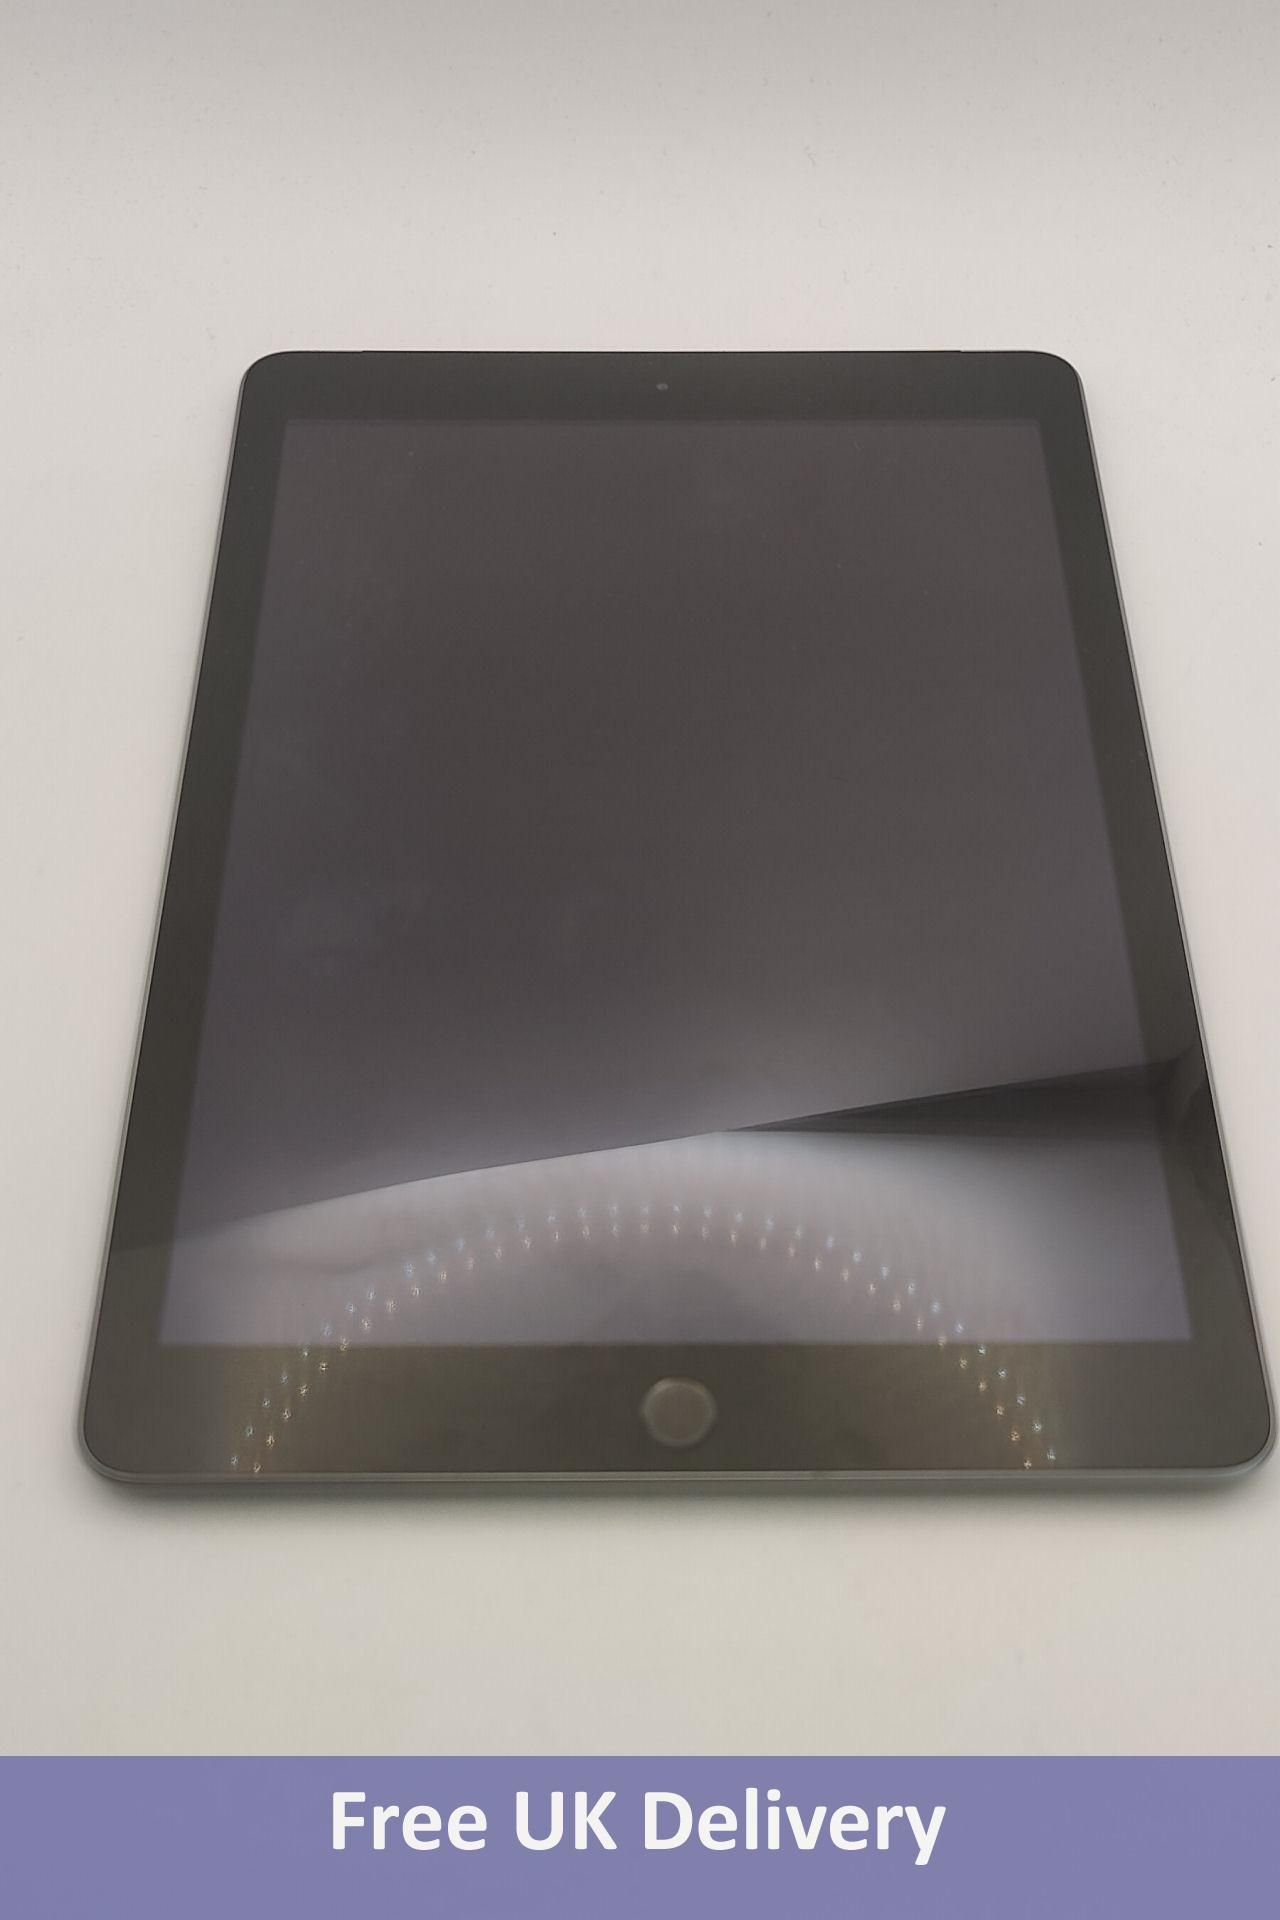 Apple iPad 9.7" 5th Gen, Wi-Fi and Cellular. Used, Remote management locked, sold for spares/repair